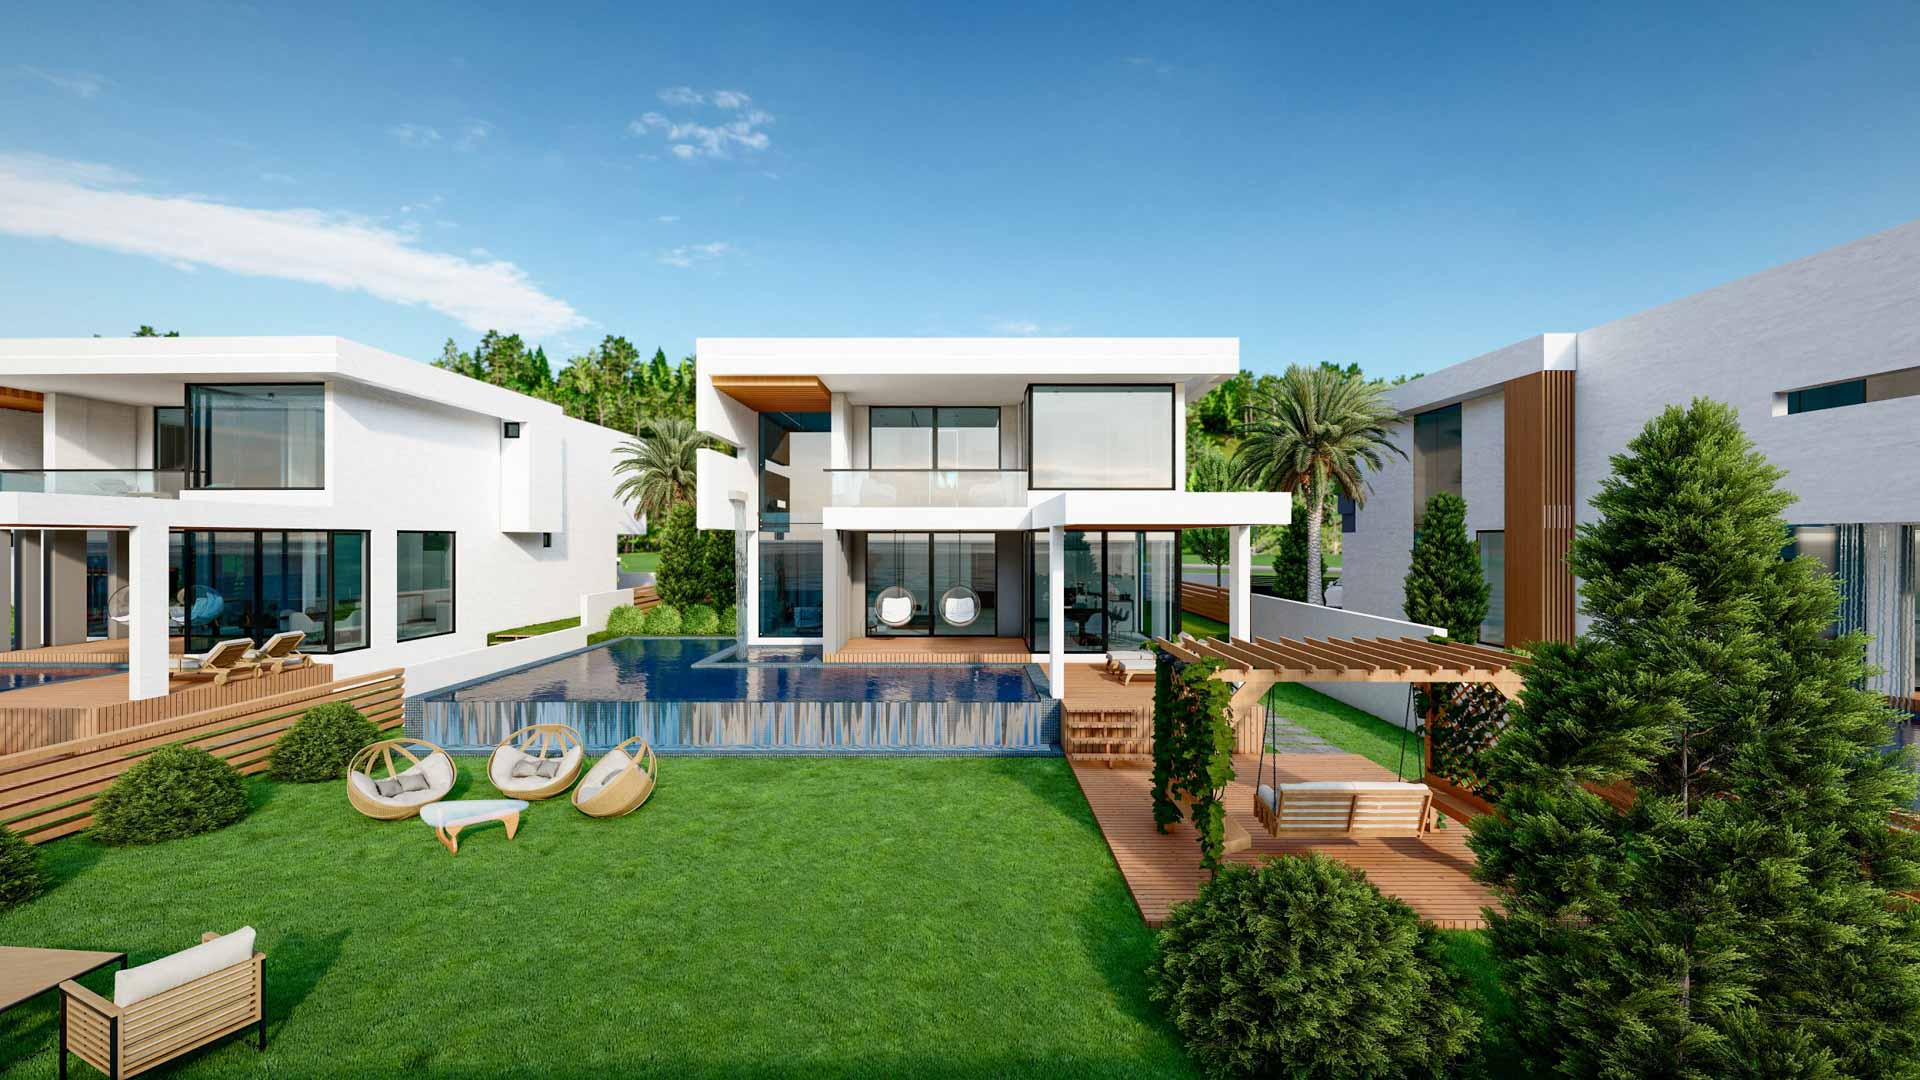 id983-two-storey-41-villas-with-a-garden-and-a-swimming-pool-in-demirtas-area (11)